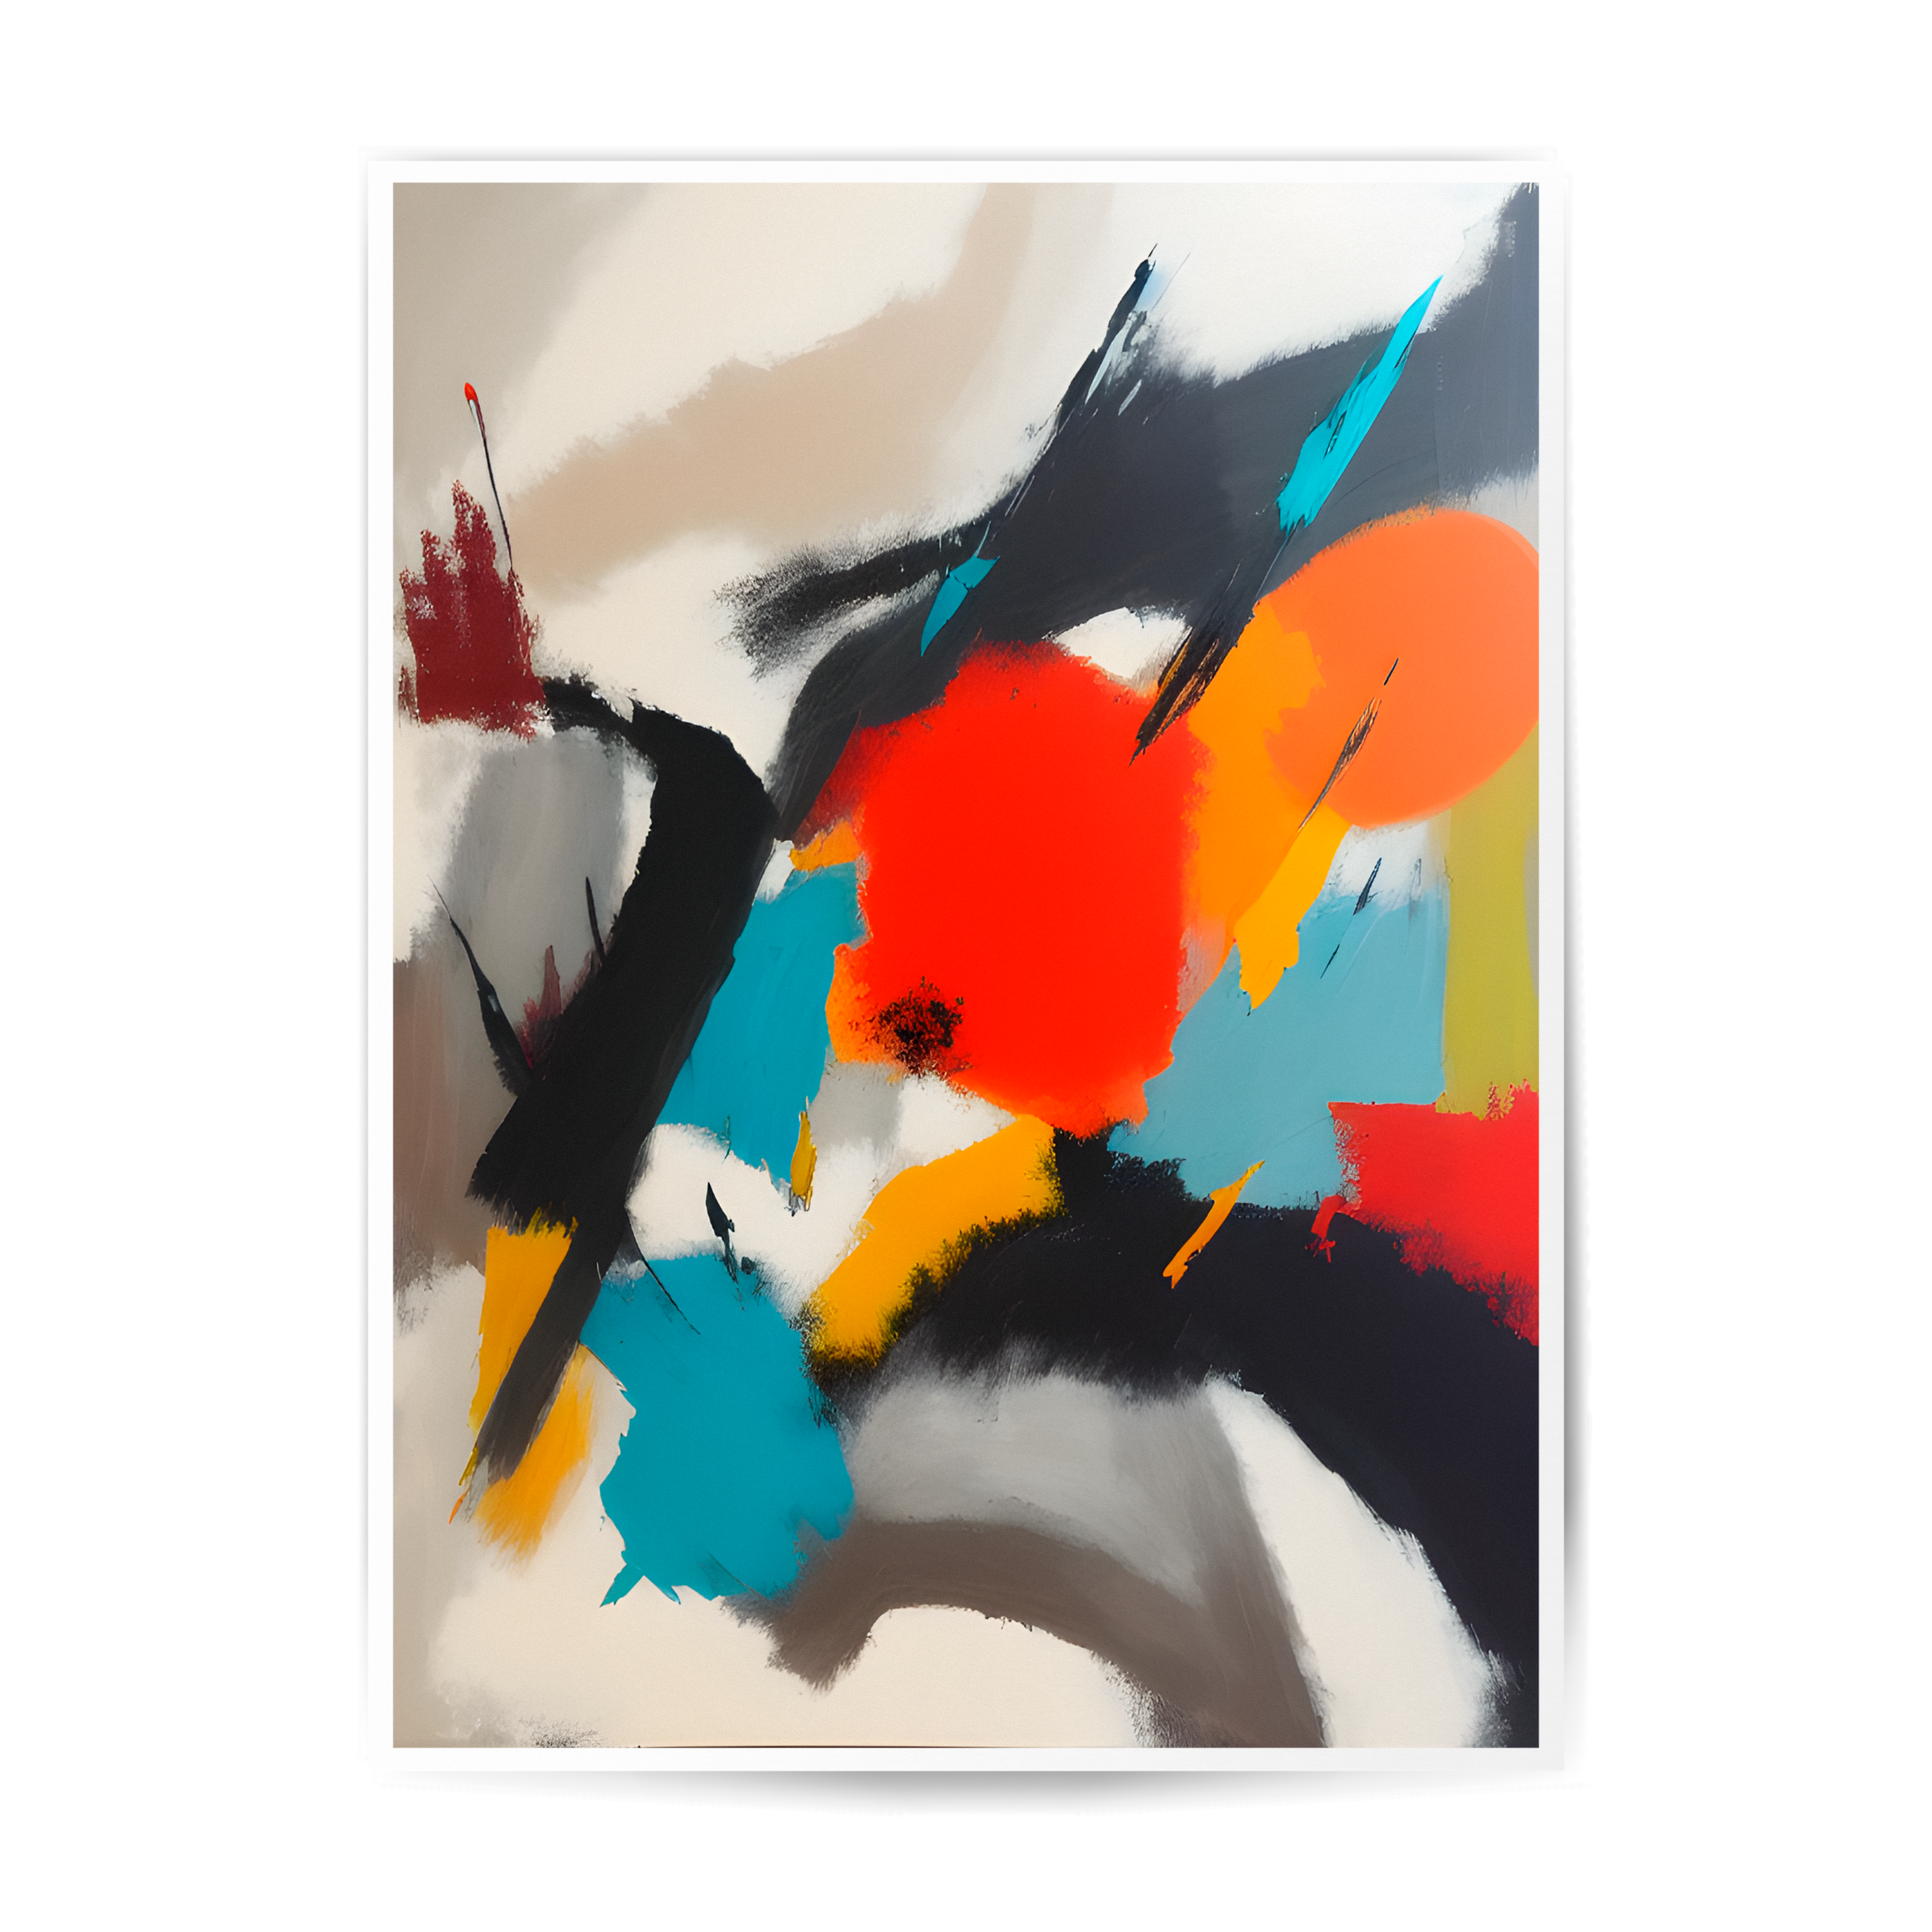 Multicolored abstract poster.